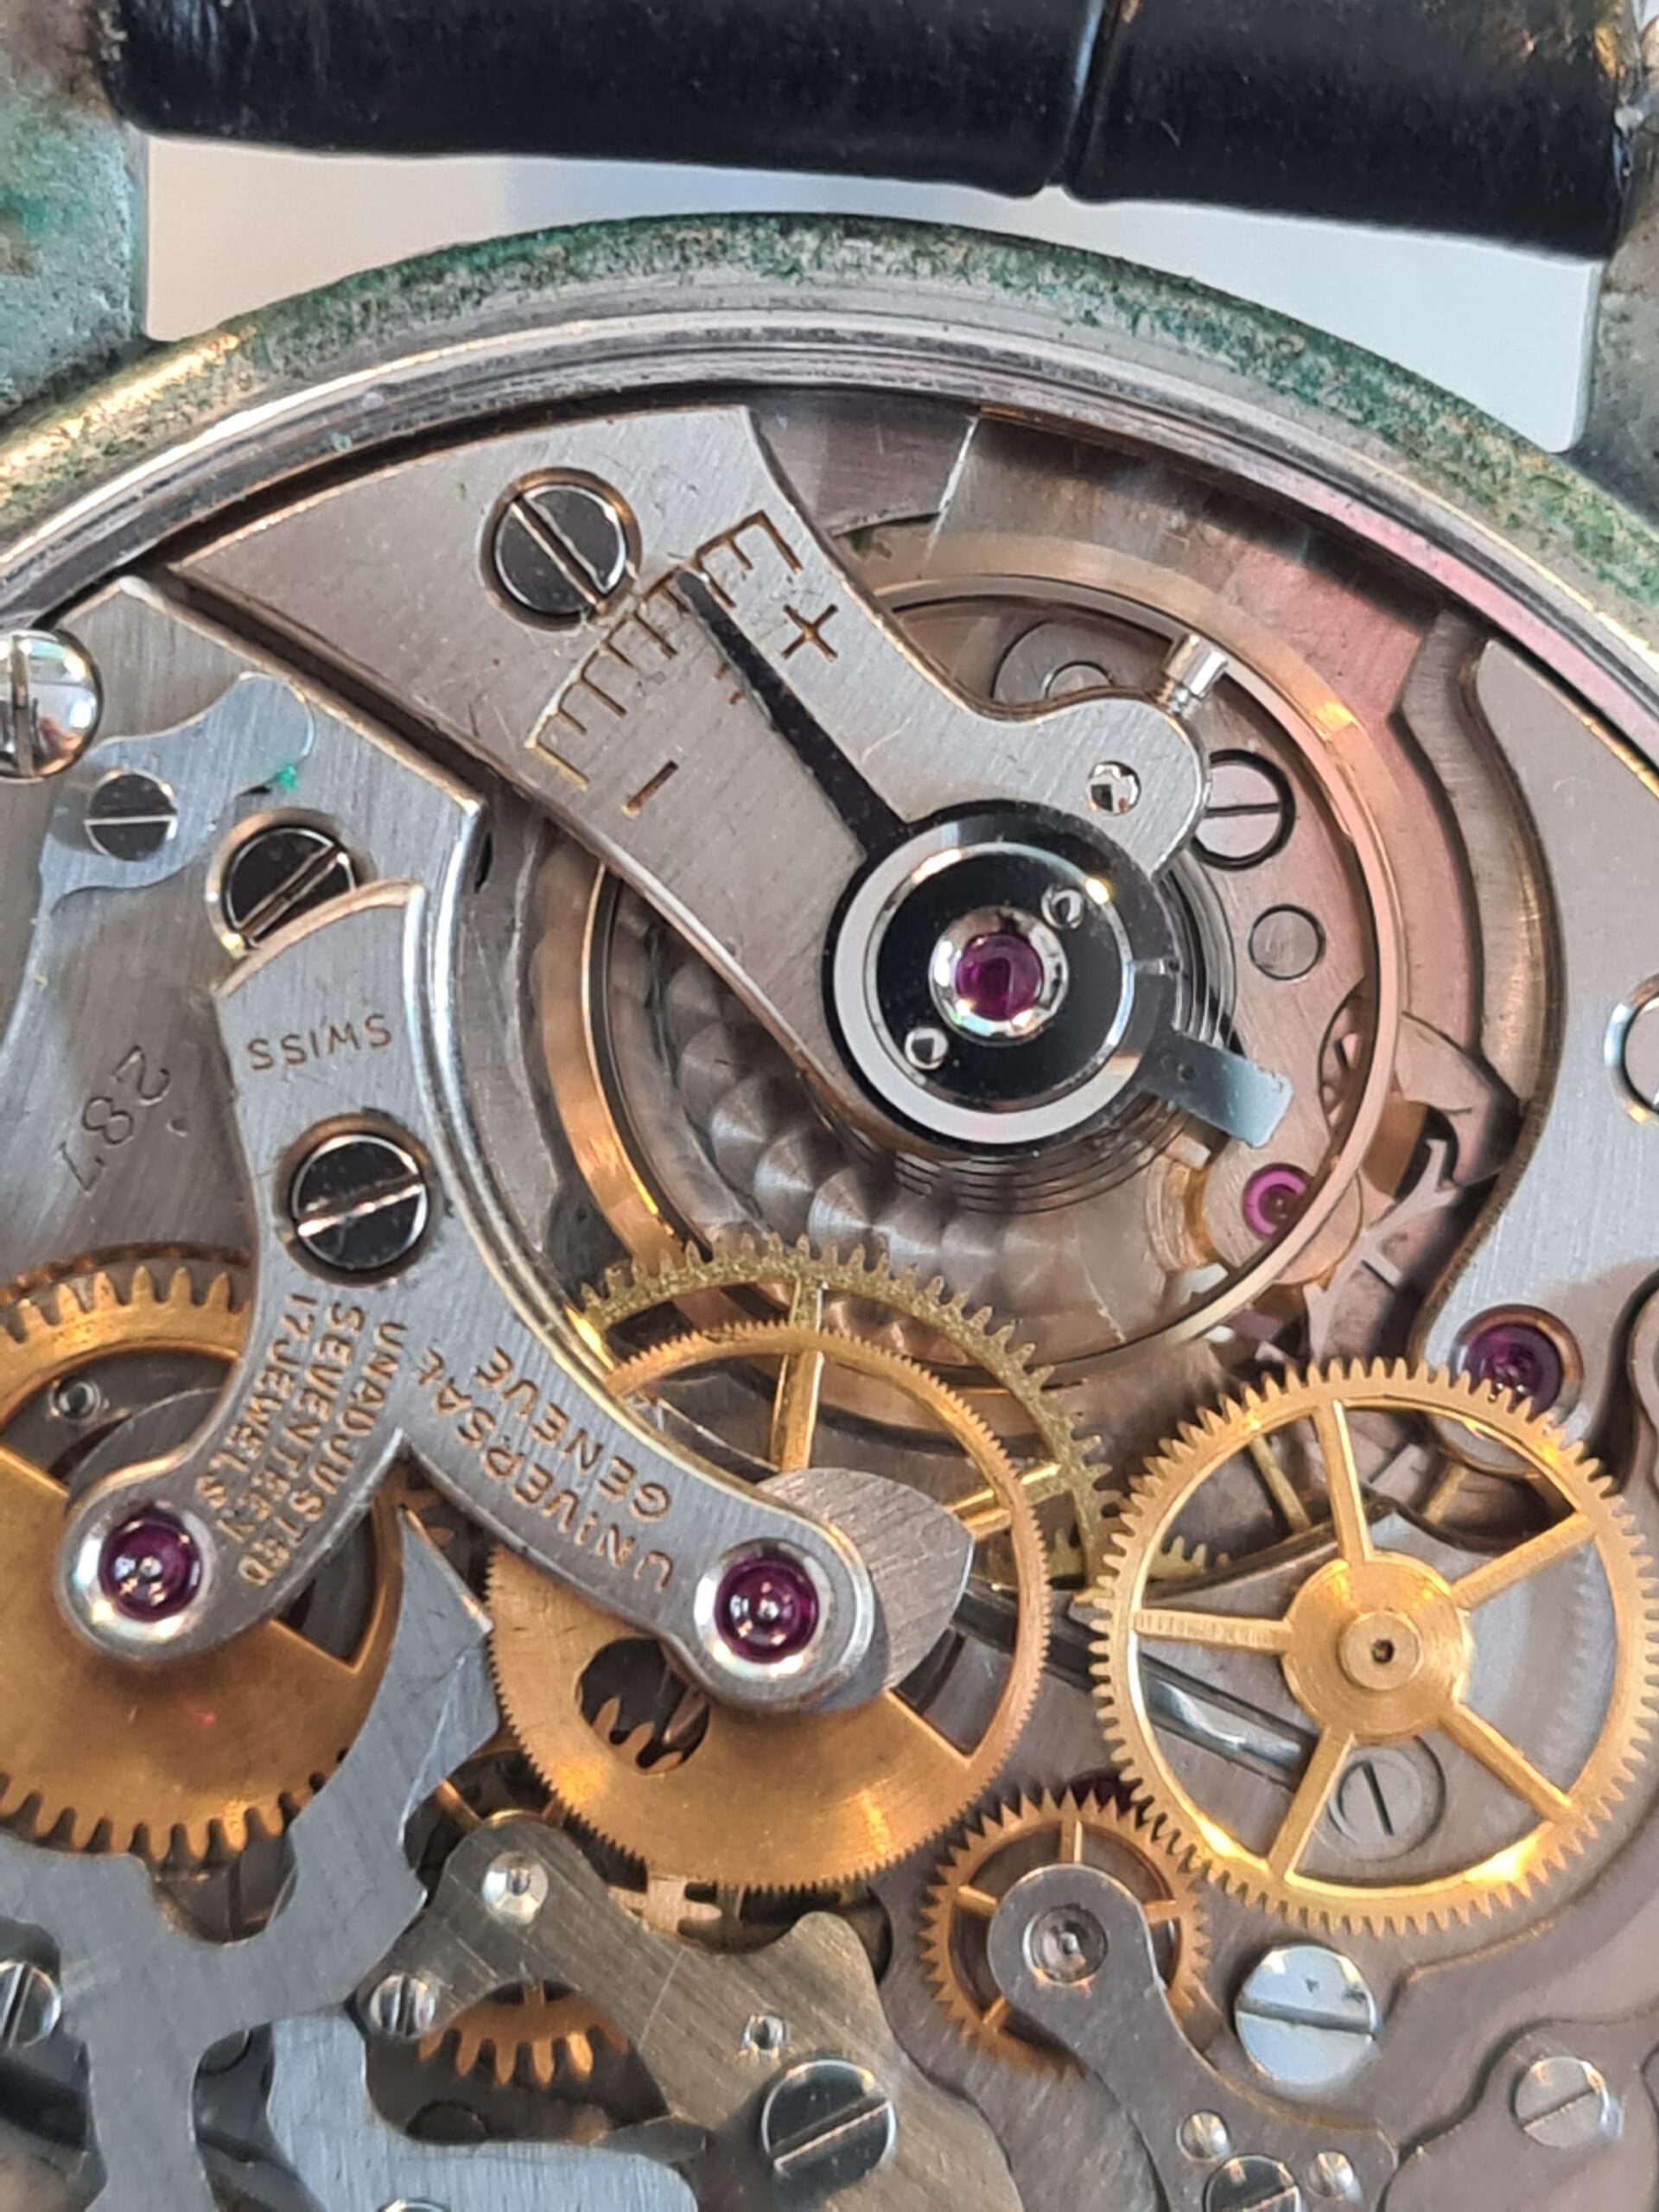 Visit to Watchmaker's Workshop in Wimbledon